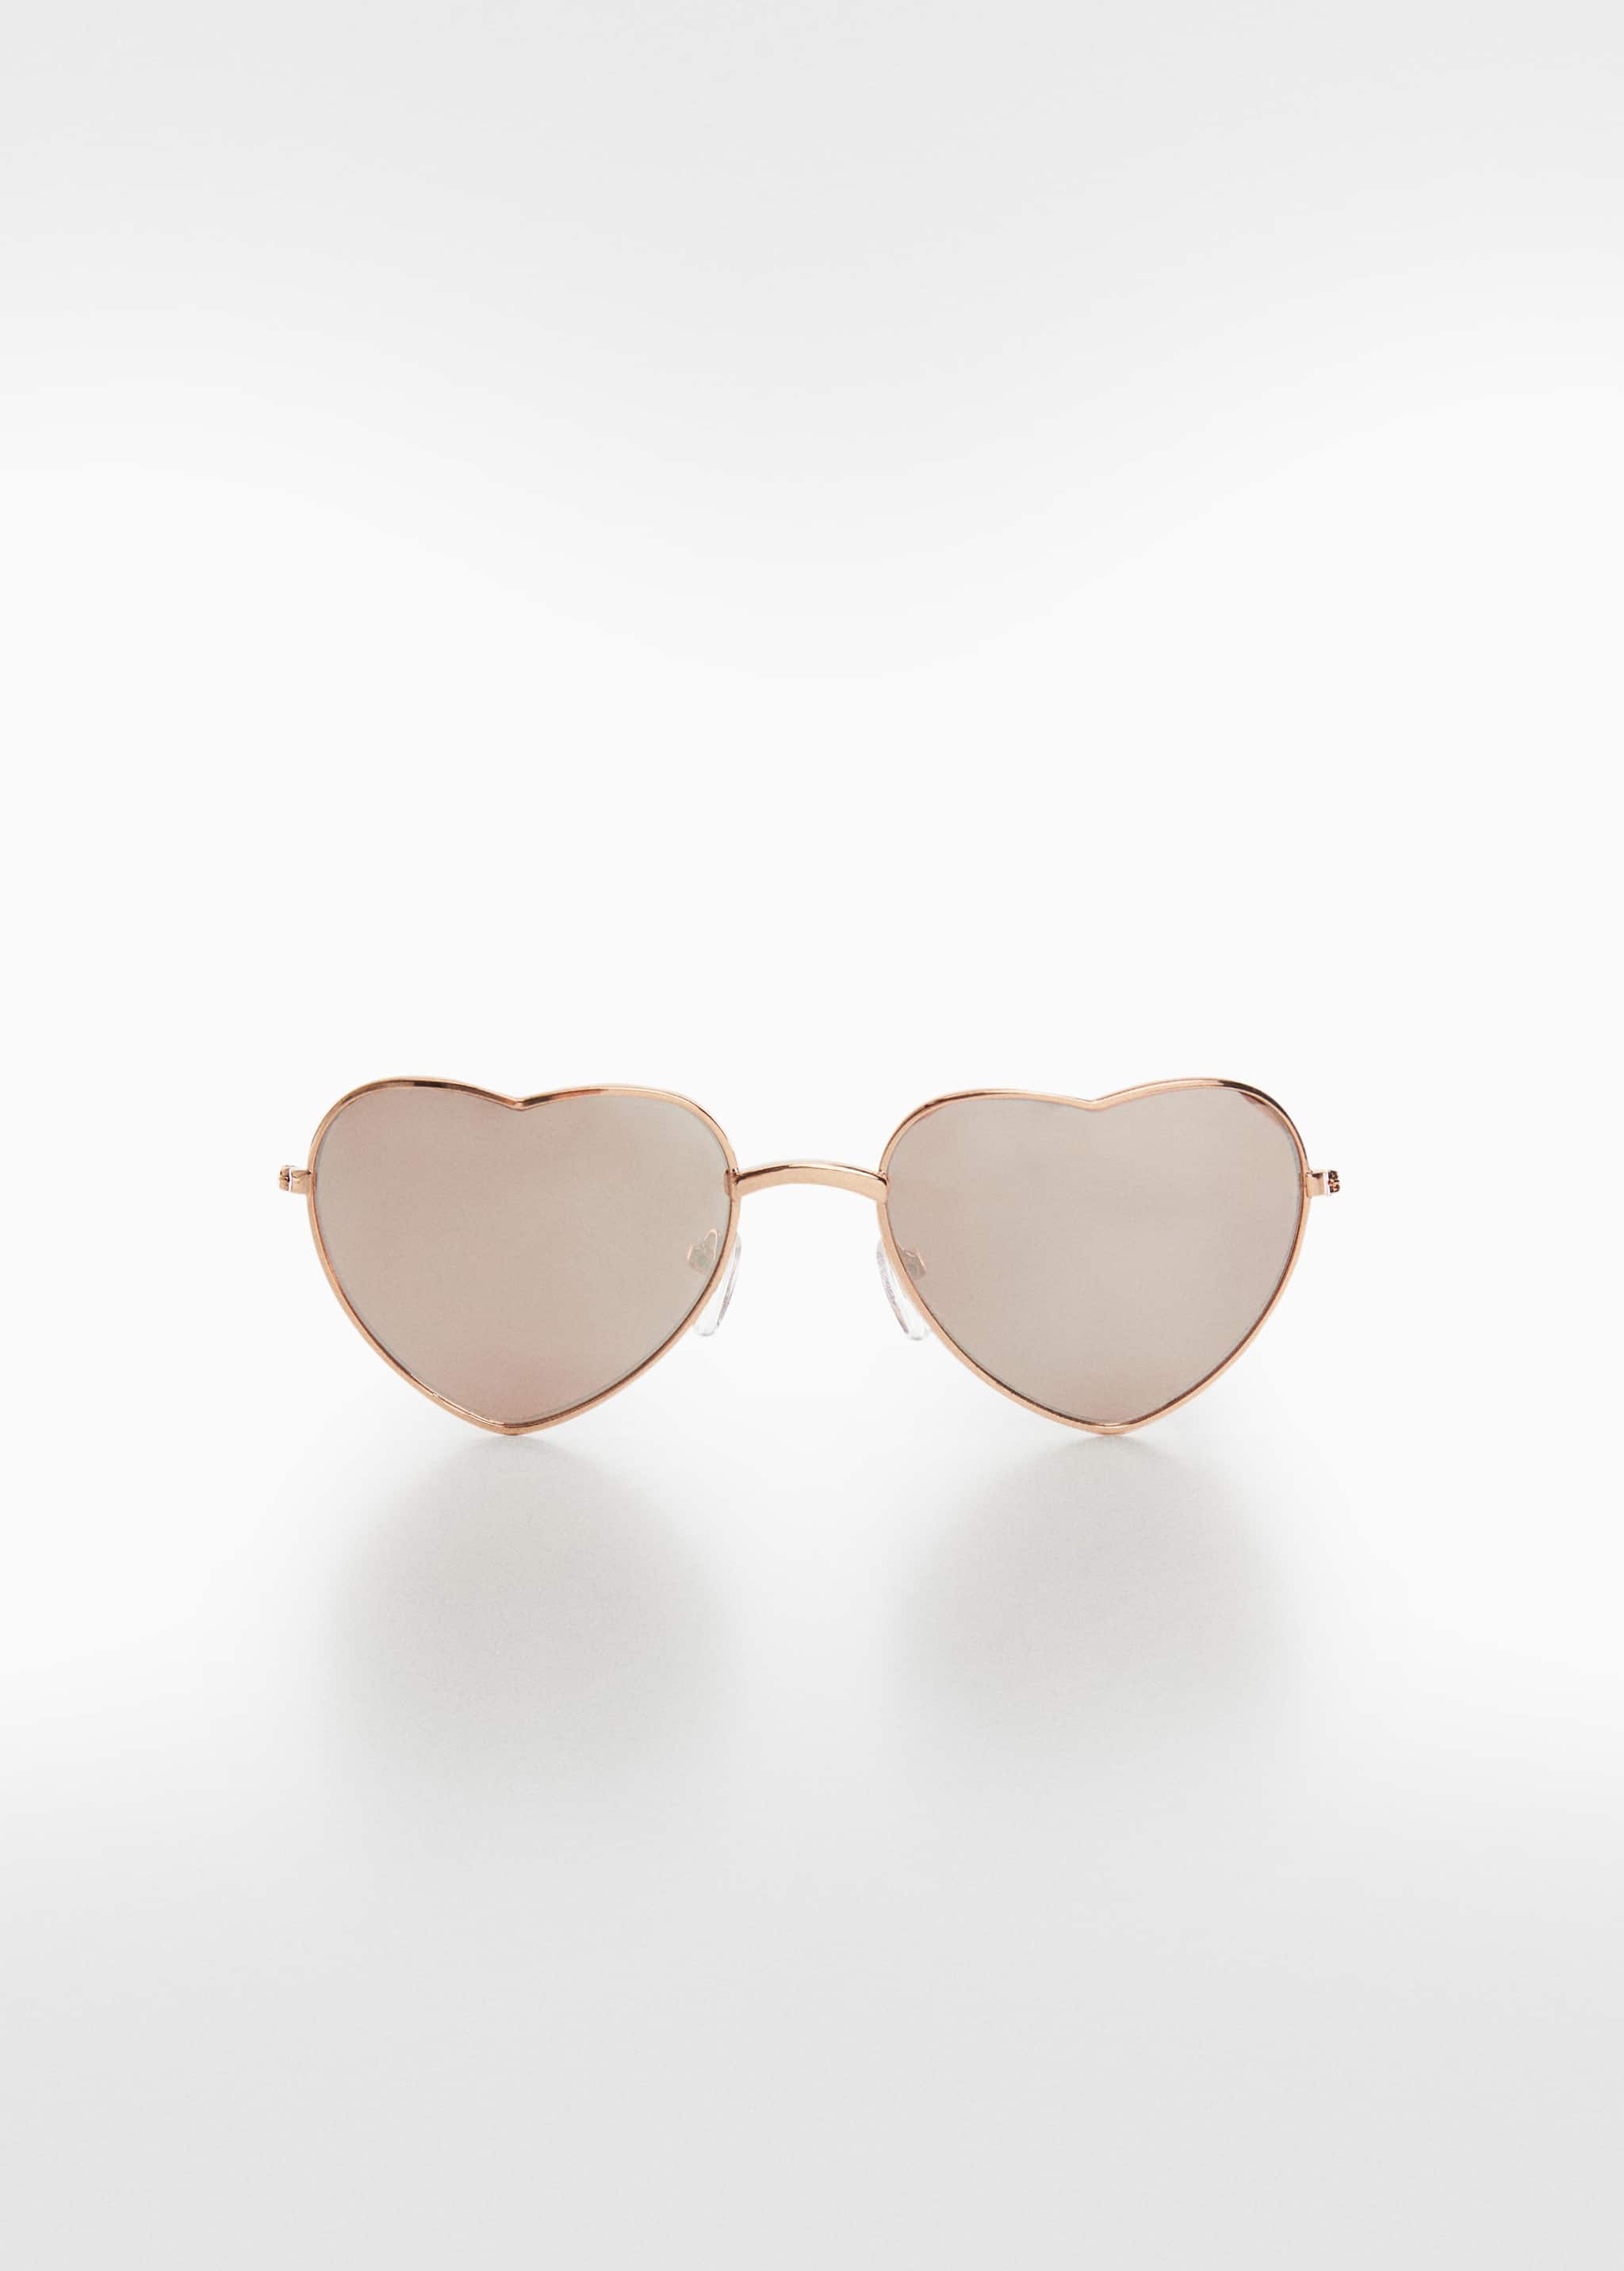 Heart-shape sunglasses - Article without model